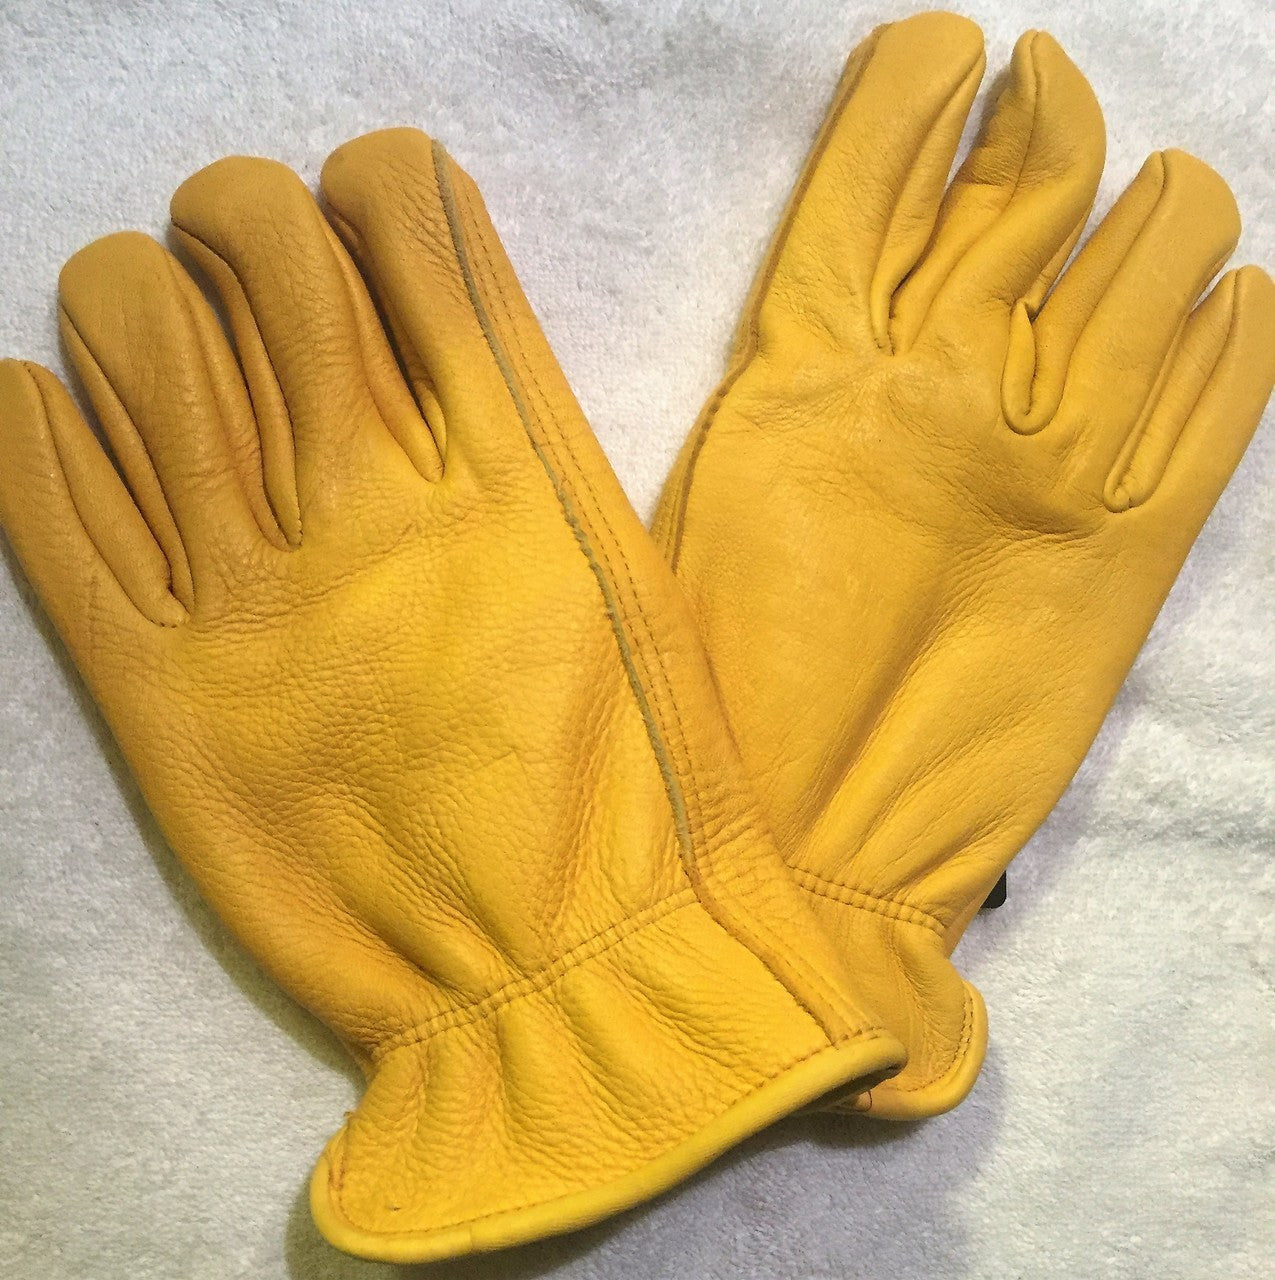 North American Trading - elk leather work/driving gloves